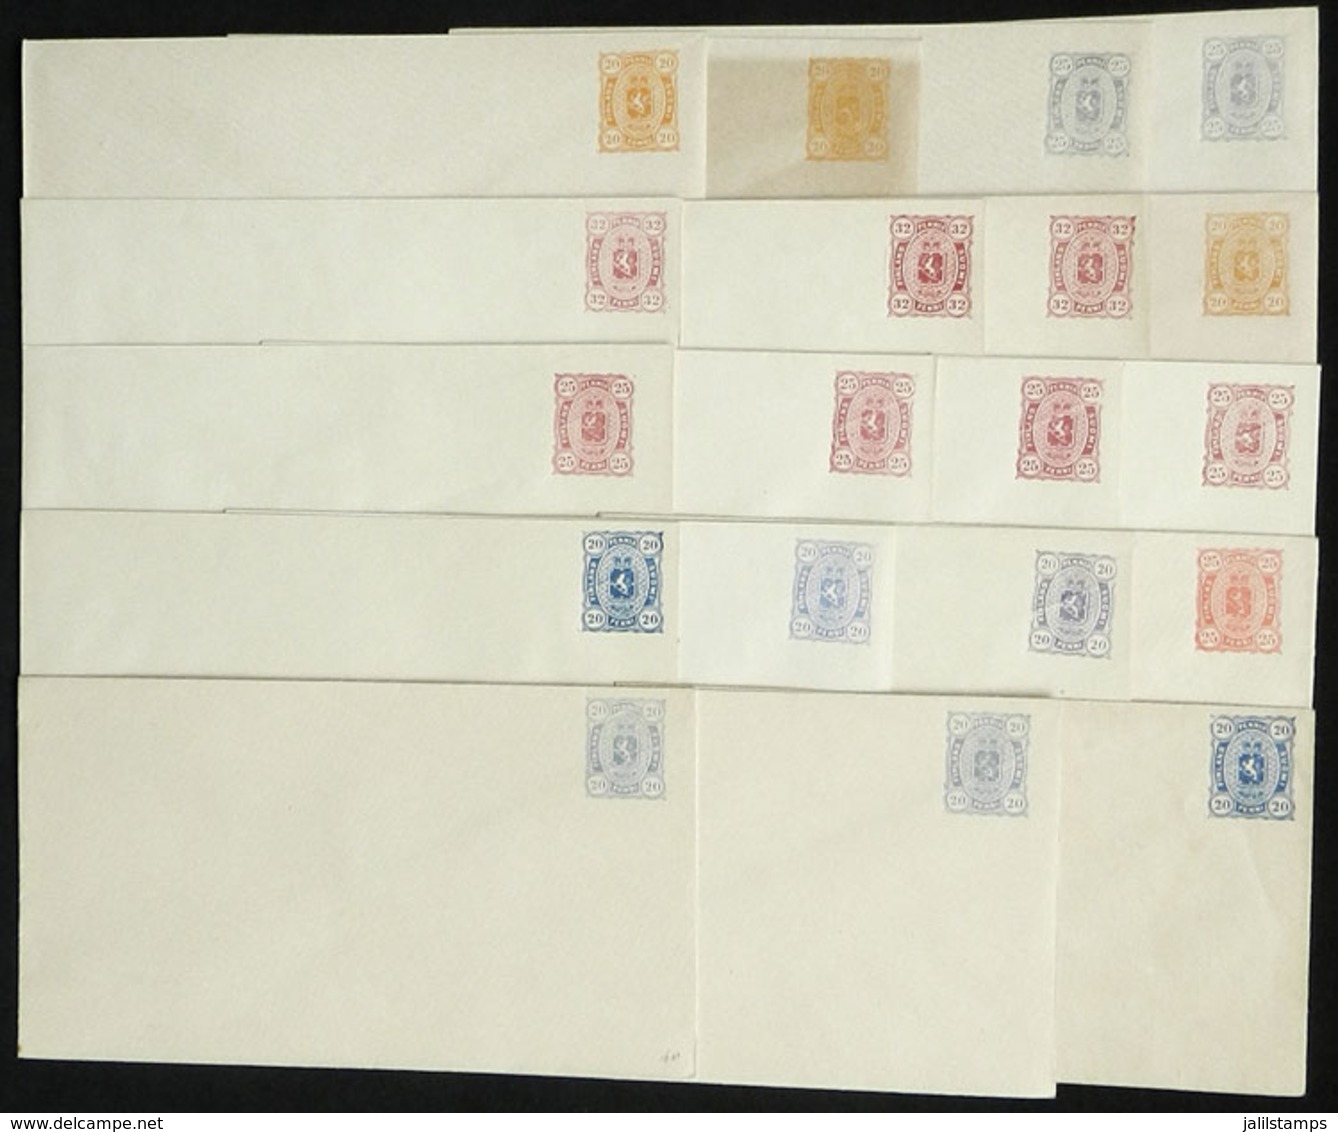 FINLAND: 20 Very Old Stationery Envelopes, Unused, Excellent Quality. There Are Different Colors, Some Rare, High Catalo - Postal Stationery